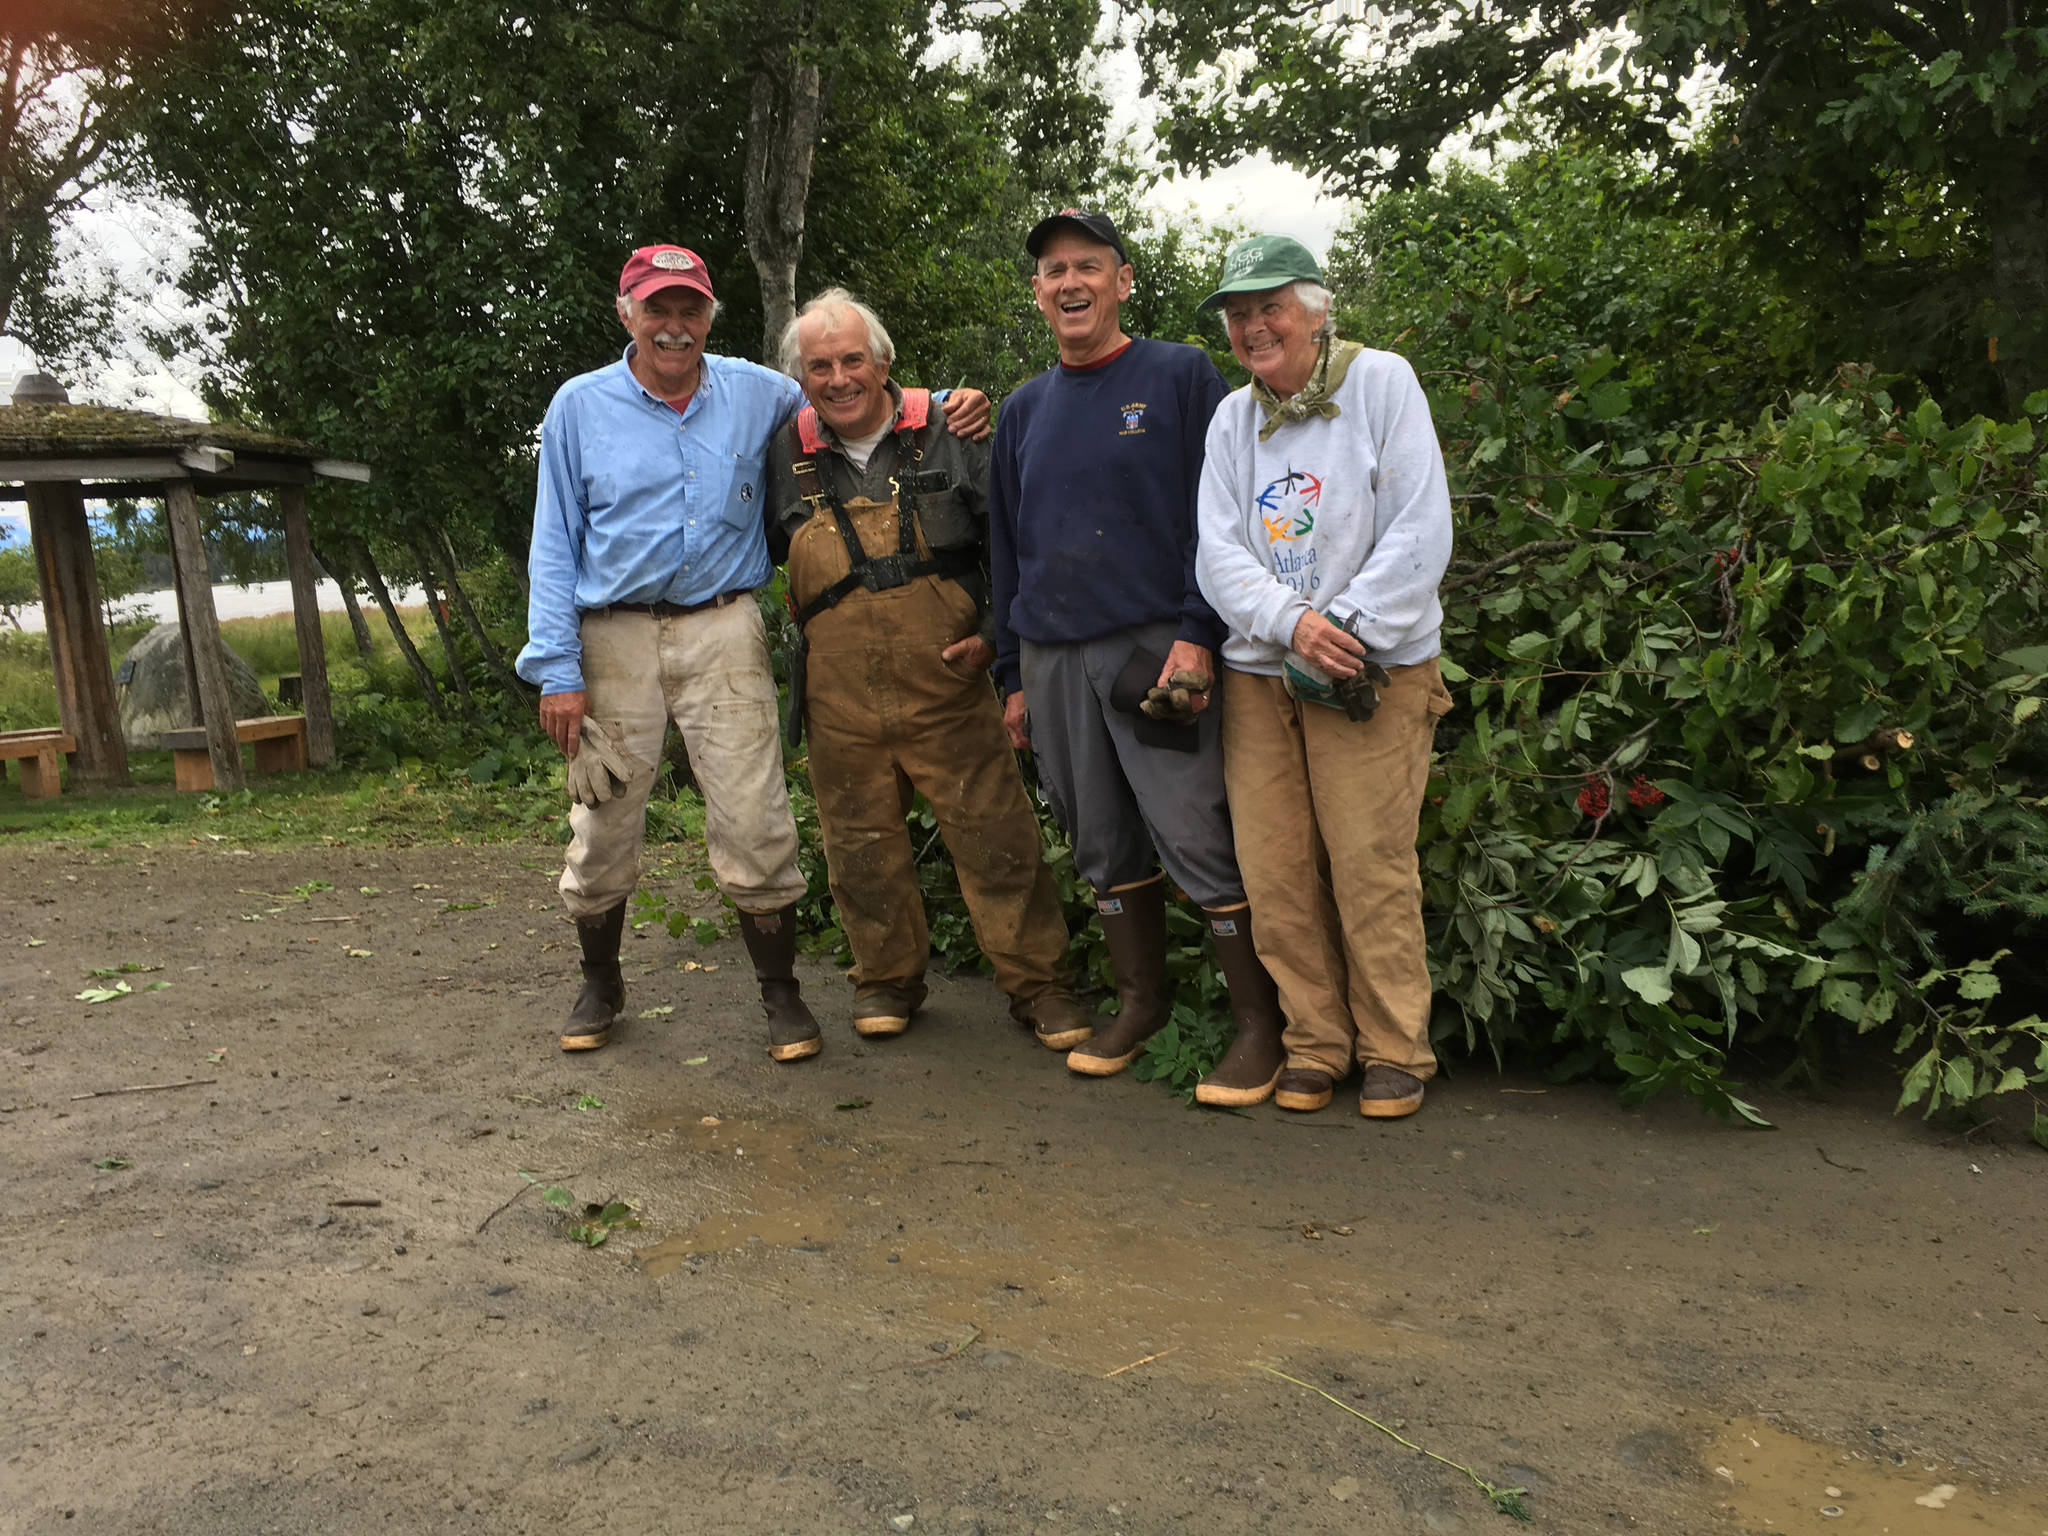 Homer-Kachemak Bay Rotarians pose for a photo after working at Ben Walters Park on Aug. 11, 2018, in Homer, Alaska. From left to right are Tom Early, David Brann, Bernie Griffard and Kathy Hill. (Photo provided)